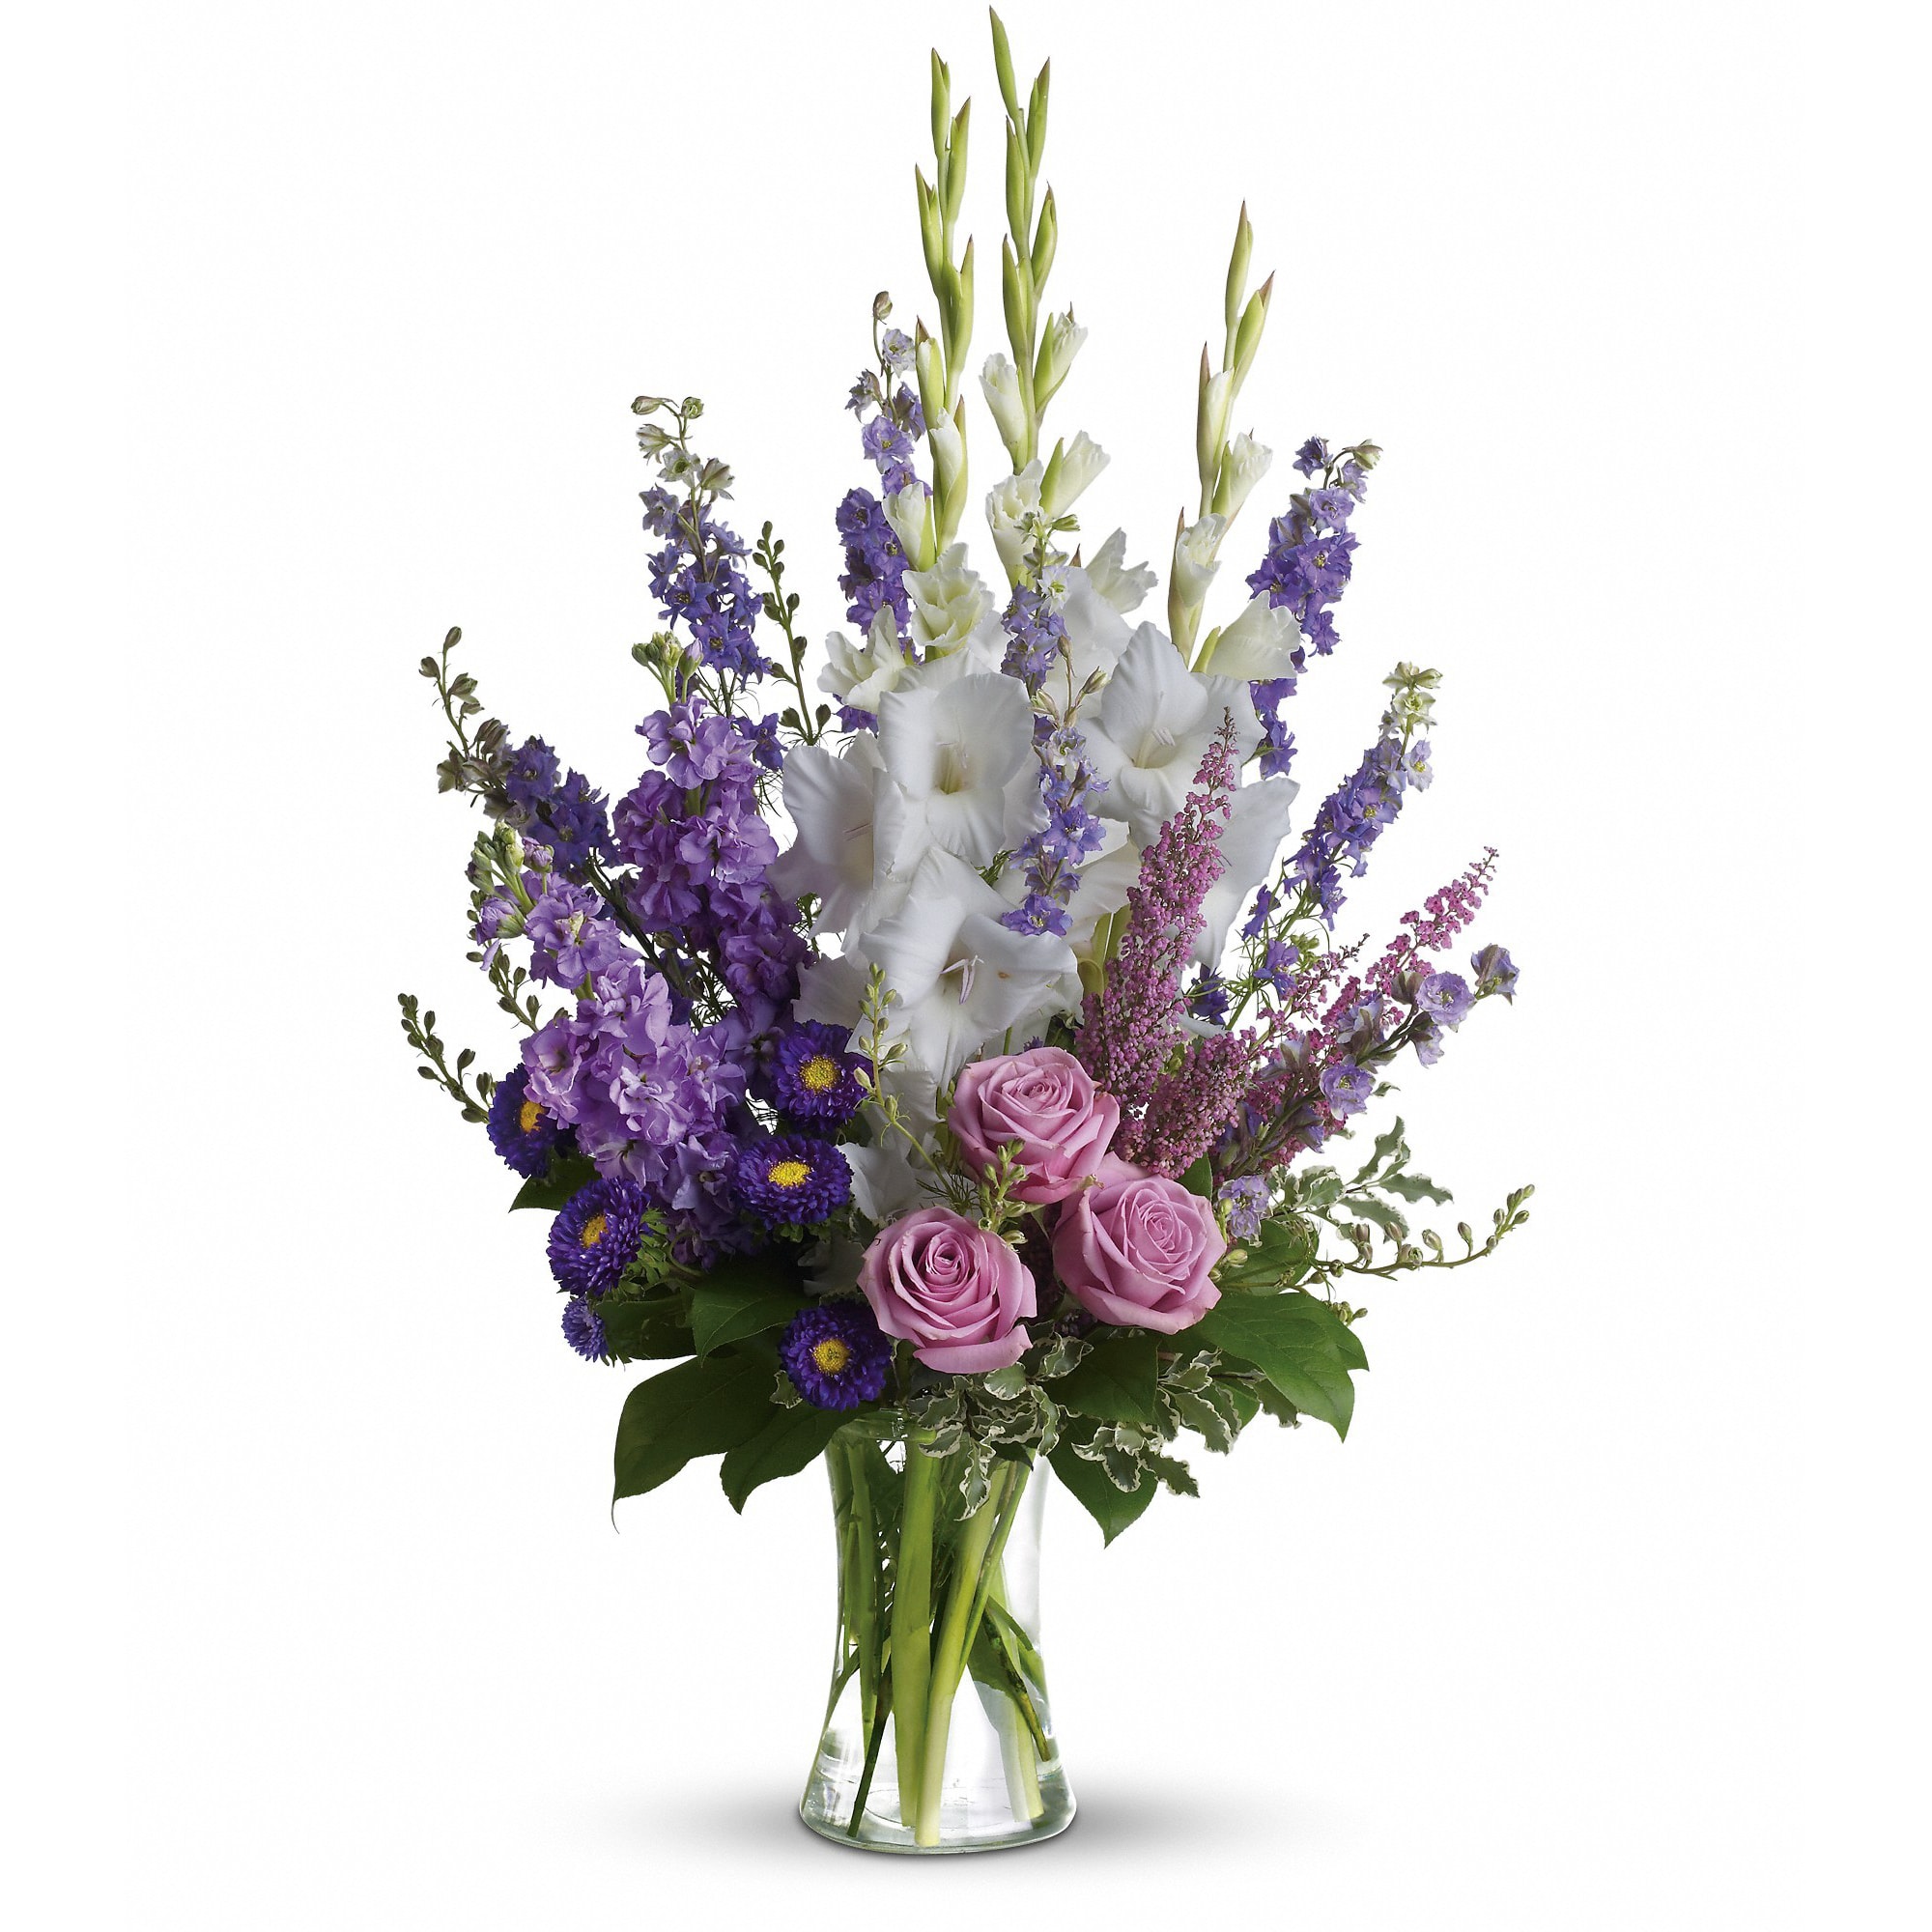 Beautiful Memories - Lavender and white sympathy flowers make a grand statement in this joyful bouquet. Cherish your memories with this lasting remembrance of lavender larkspur and roses, deep purple asters, pure white gladioli and the softest pink heather. 